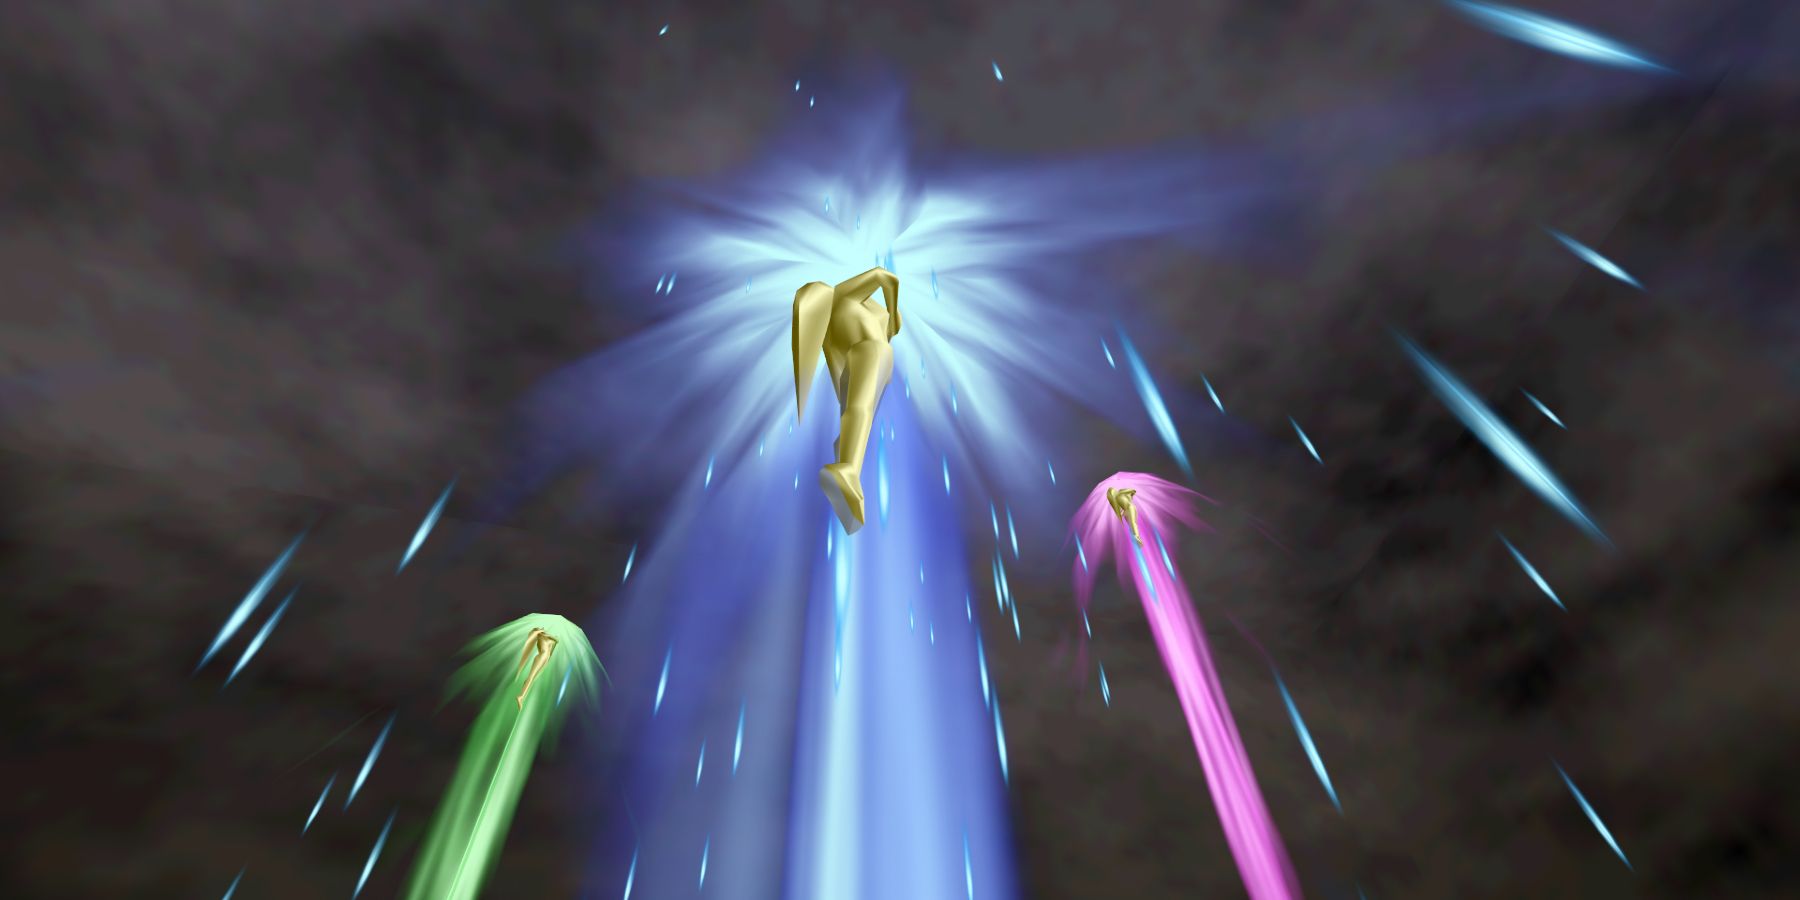 The Golden Goddesses created Hyrule and take many forms in The Legend of Zelda